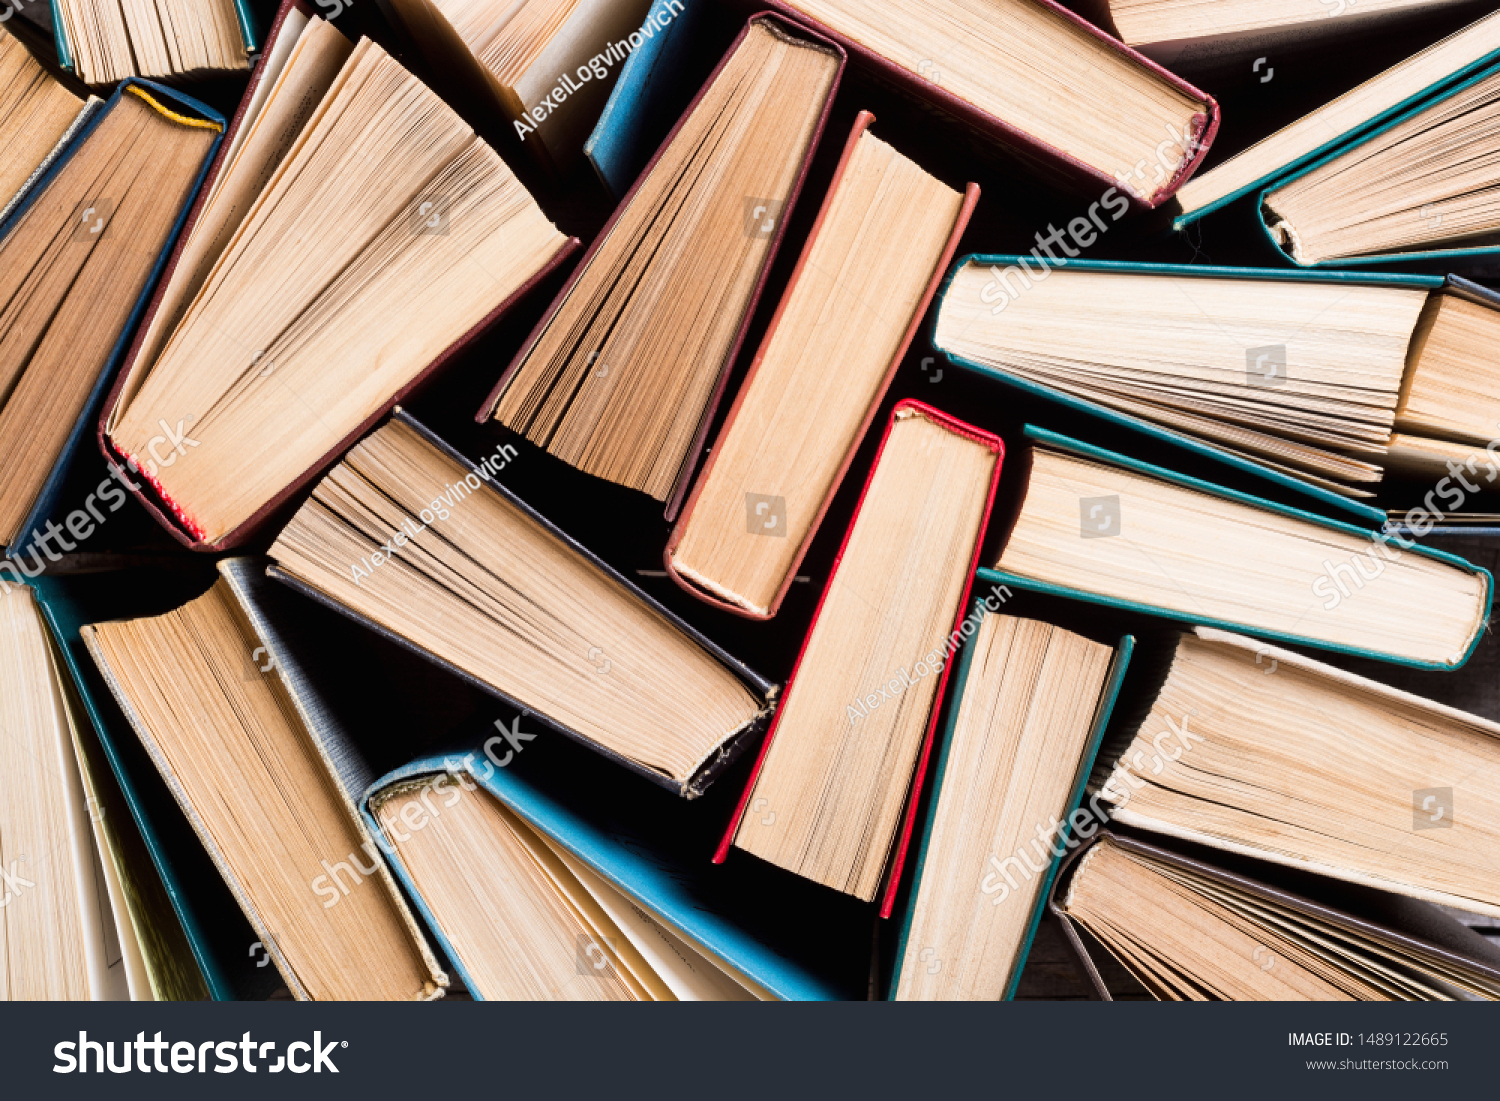 Collection of old books in library . Education background #1489122665